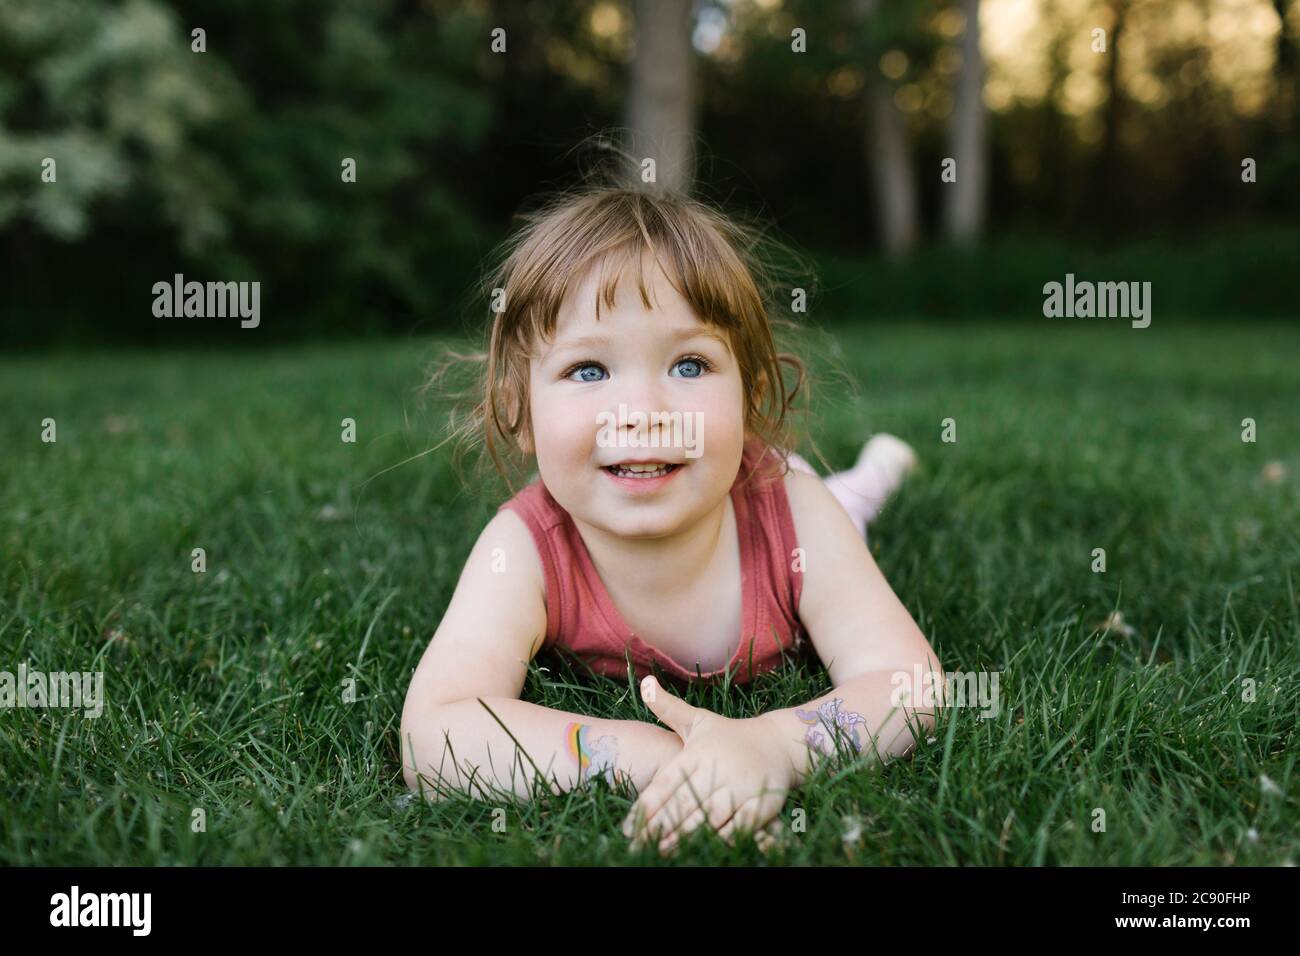 Girl (2-3) lying on grass Banque D'Images